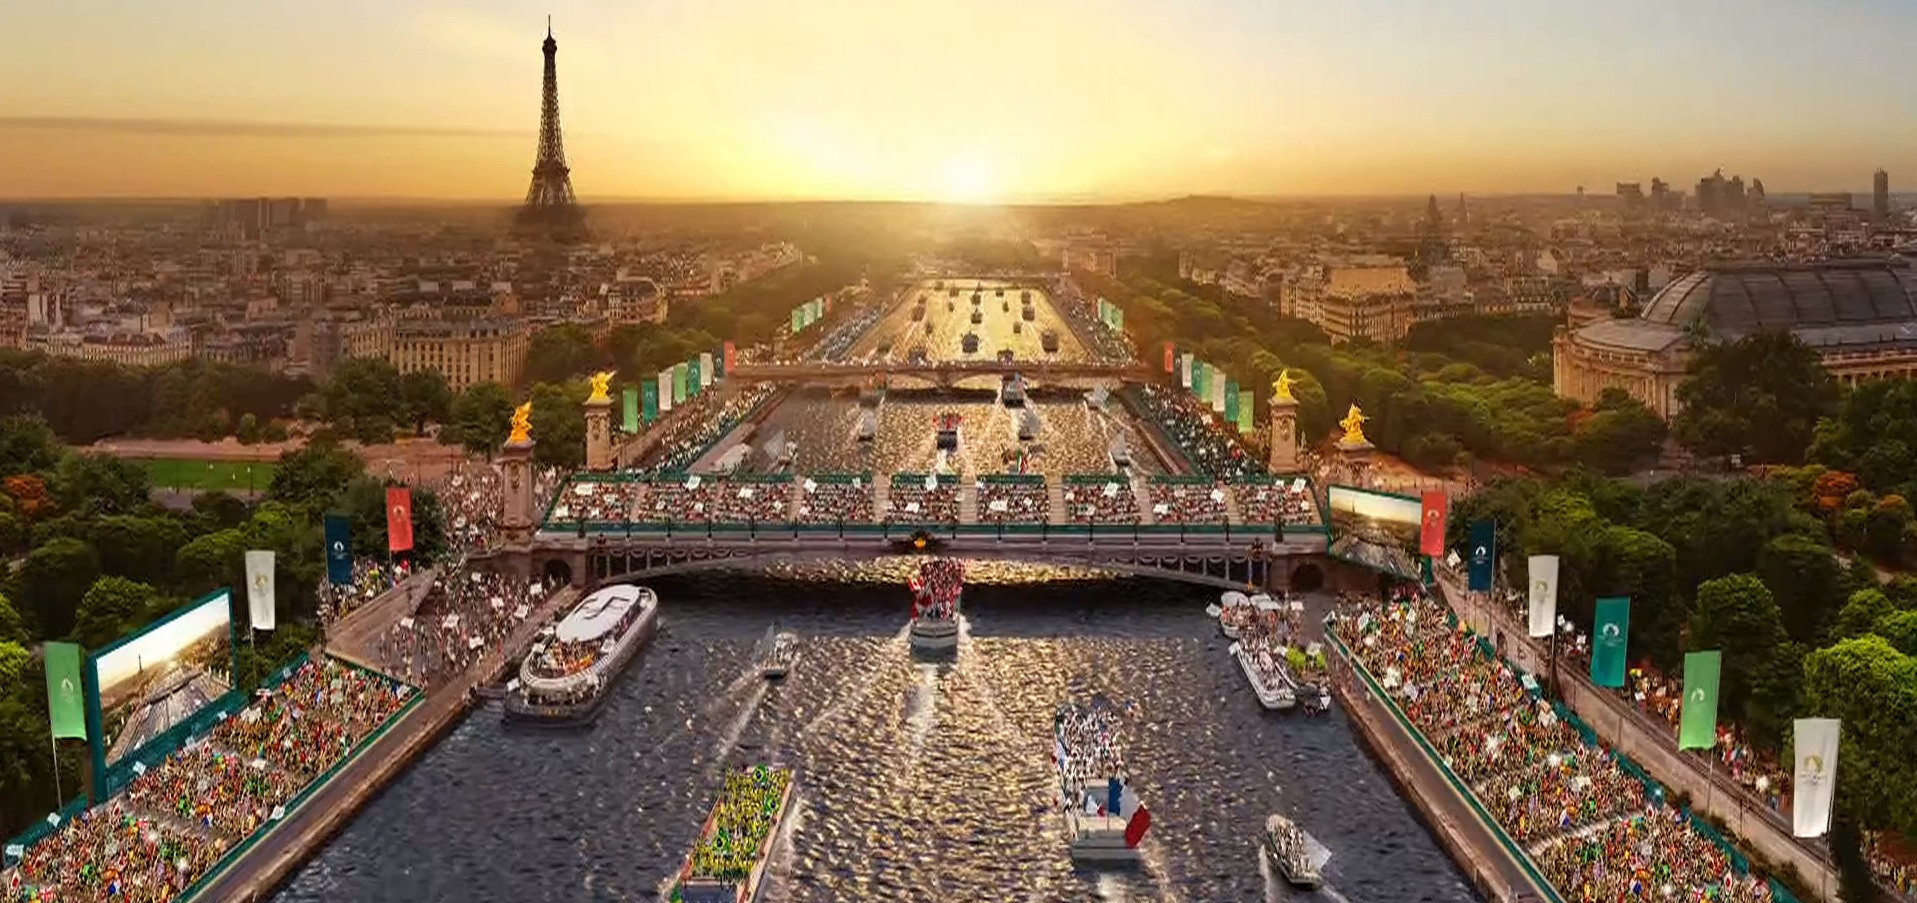 The River Seine will host the Opening Ceremony of the Paris 2024 Olympic Games ©Paris 2024